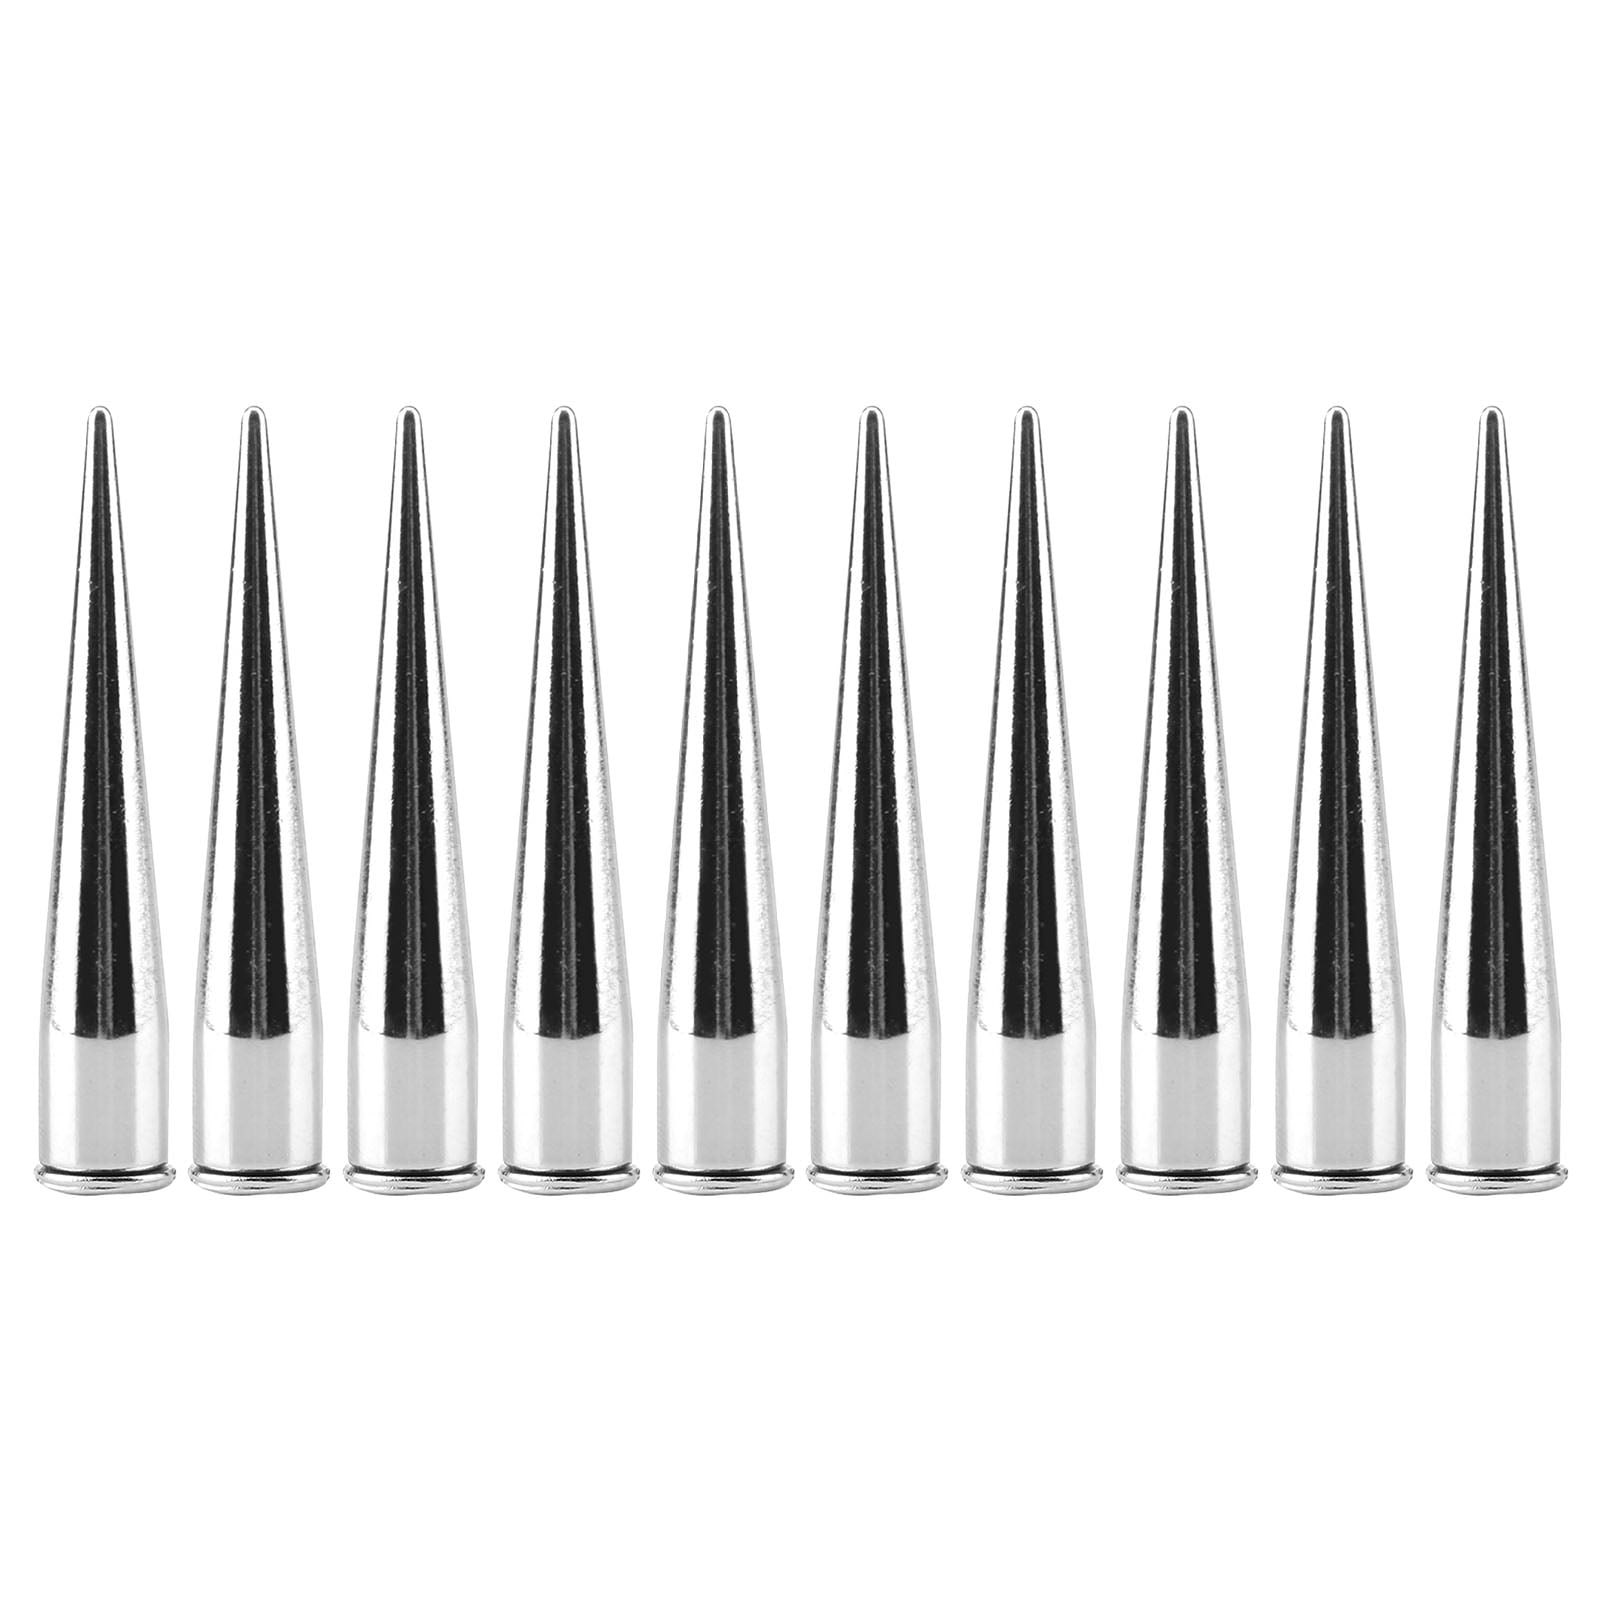 10 Sets Cone Spikes Screwback Studs Metal Rivets Cool Punk Spikes Large  Small Spikes with Screw Bases for Leather DIY Craft Projects Clothing Decor[ Silver] 